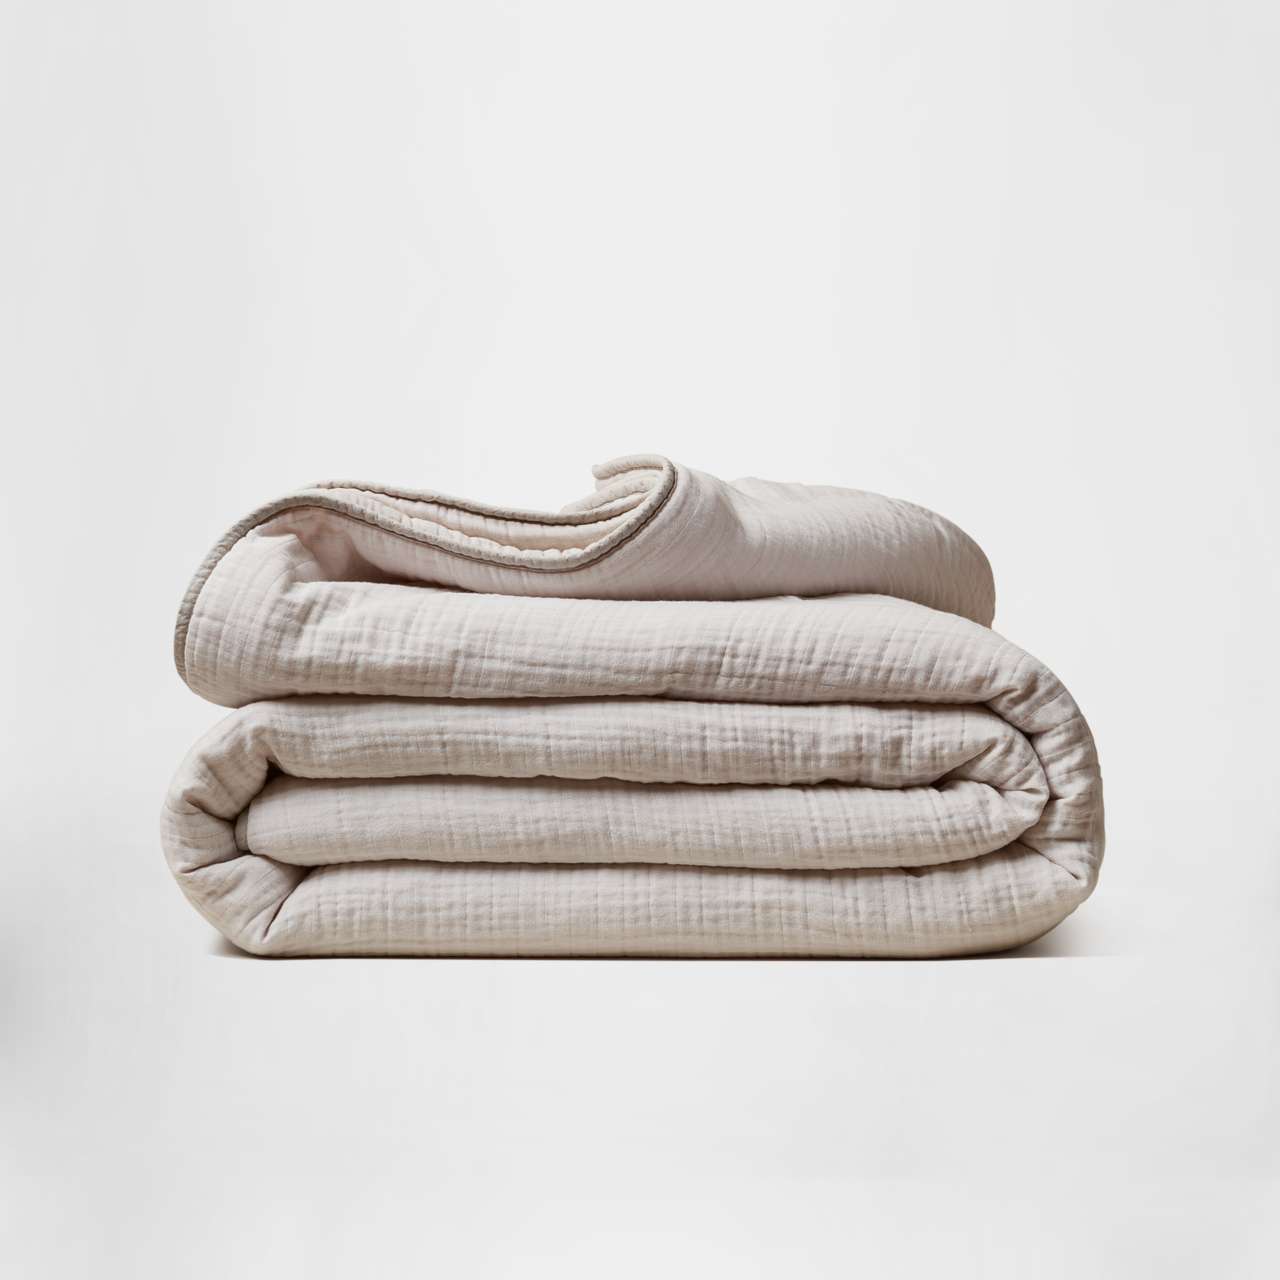 Muslin Blankets and Bedding Image 1